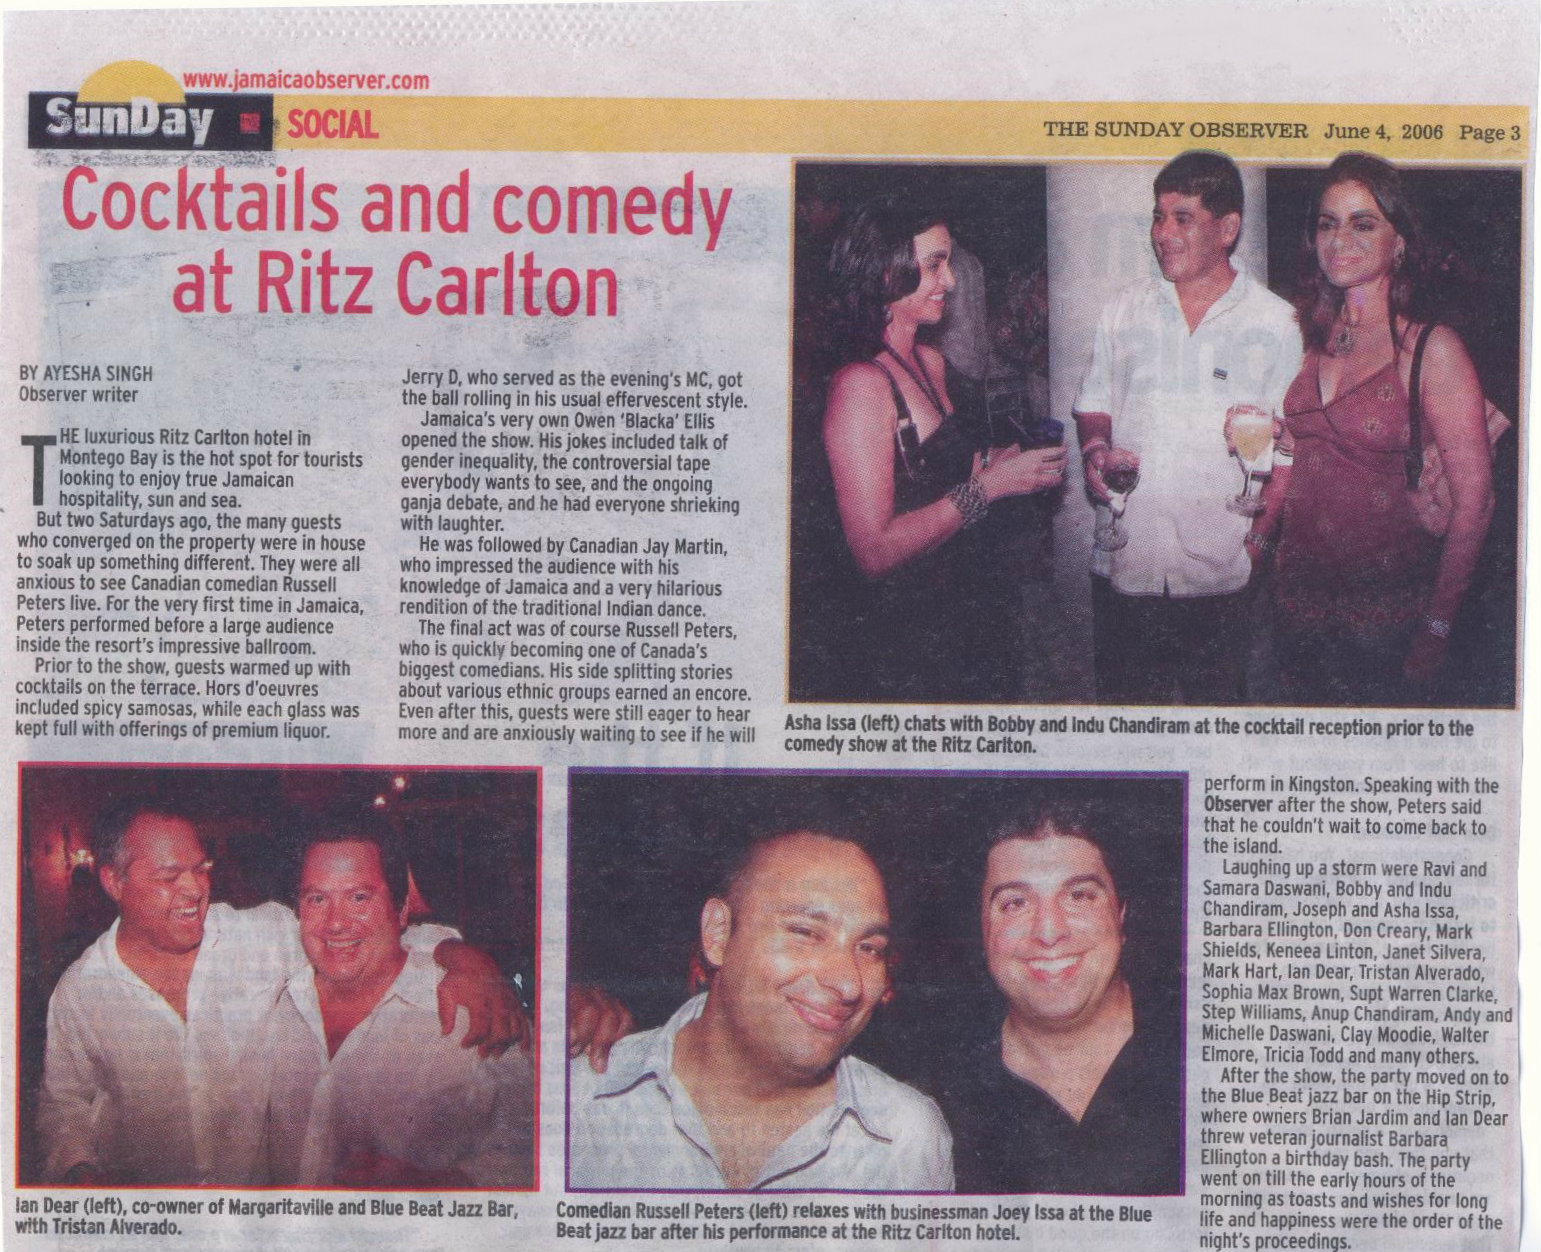 Cocktails and comedy at Ritz Carlton